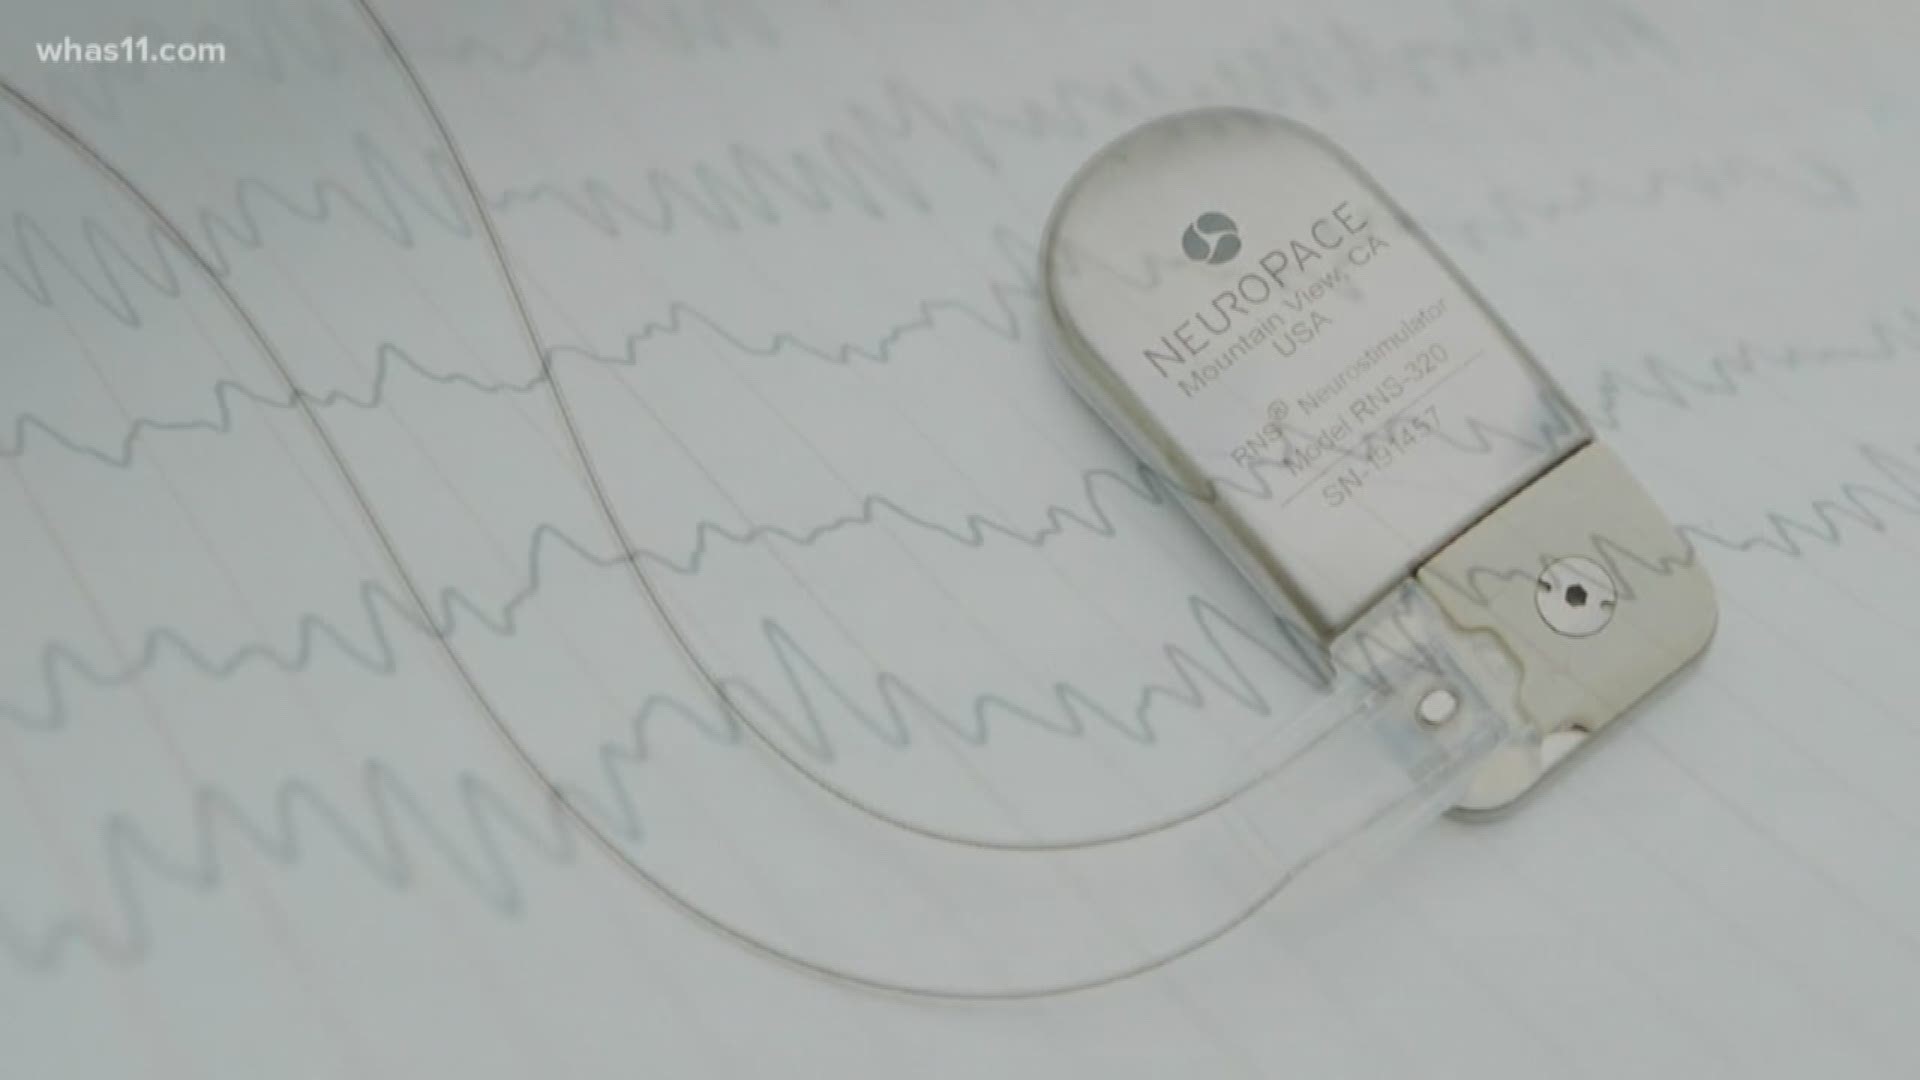 Medicine helps some struggling with epilepsy, but a new device similar to a pacemaker is making waves in the field, cutting down the number of seizures and their side effects.